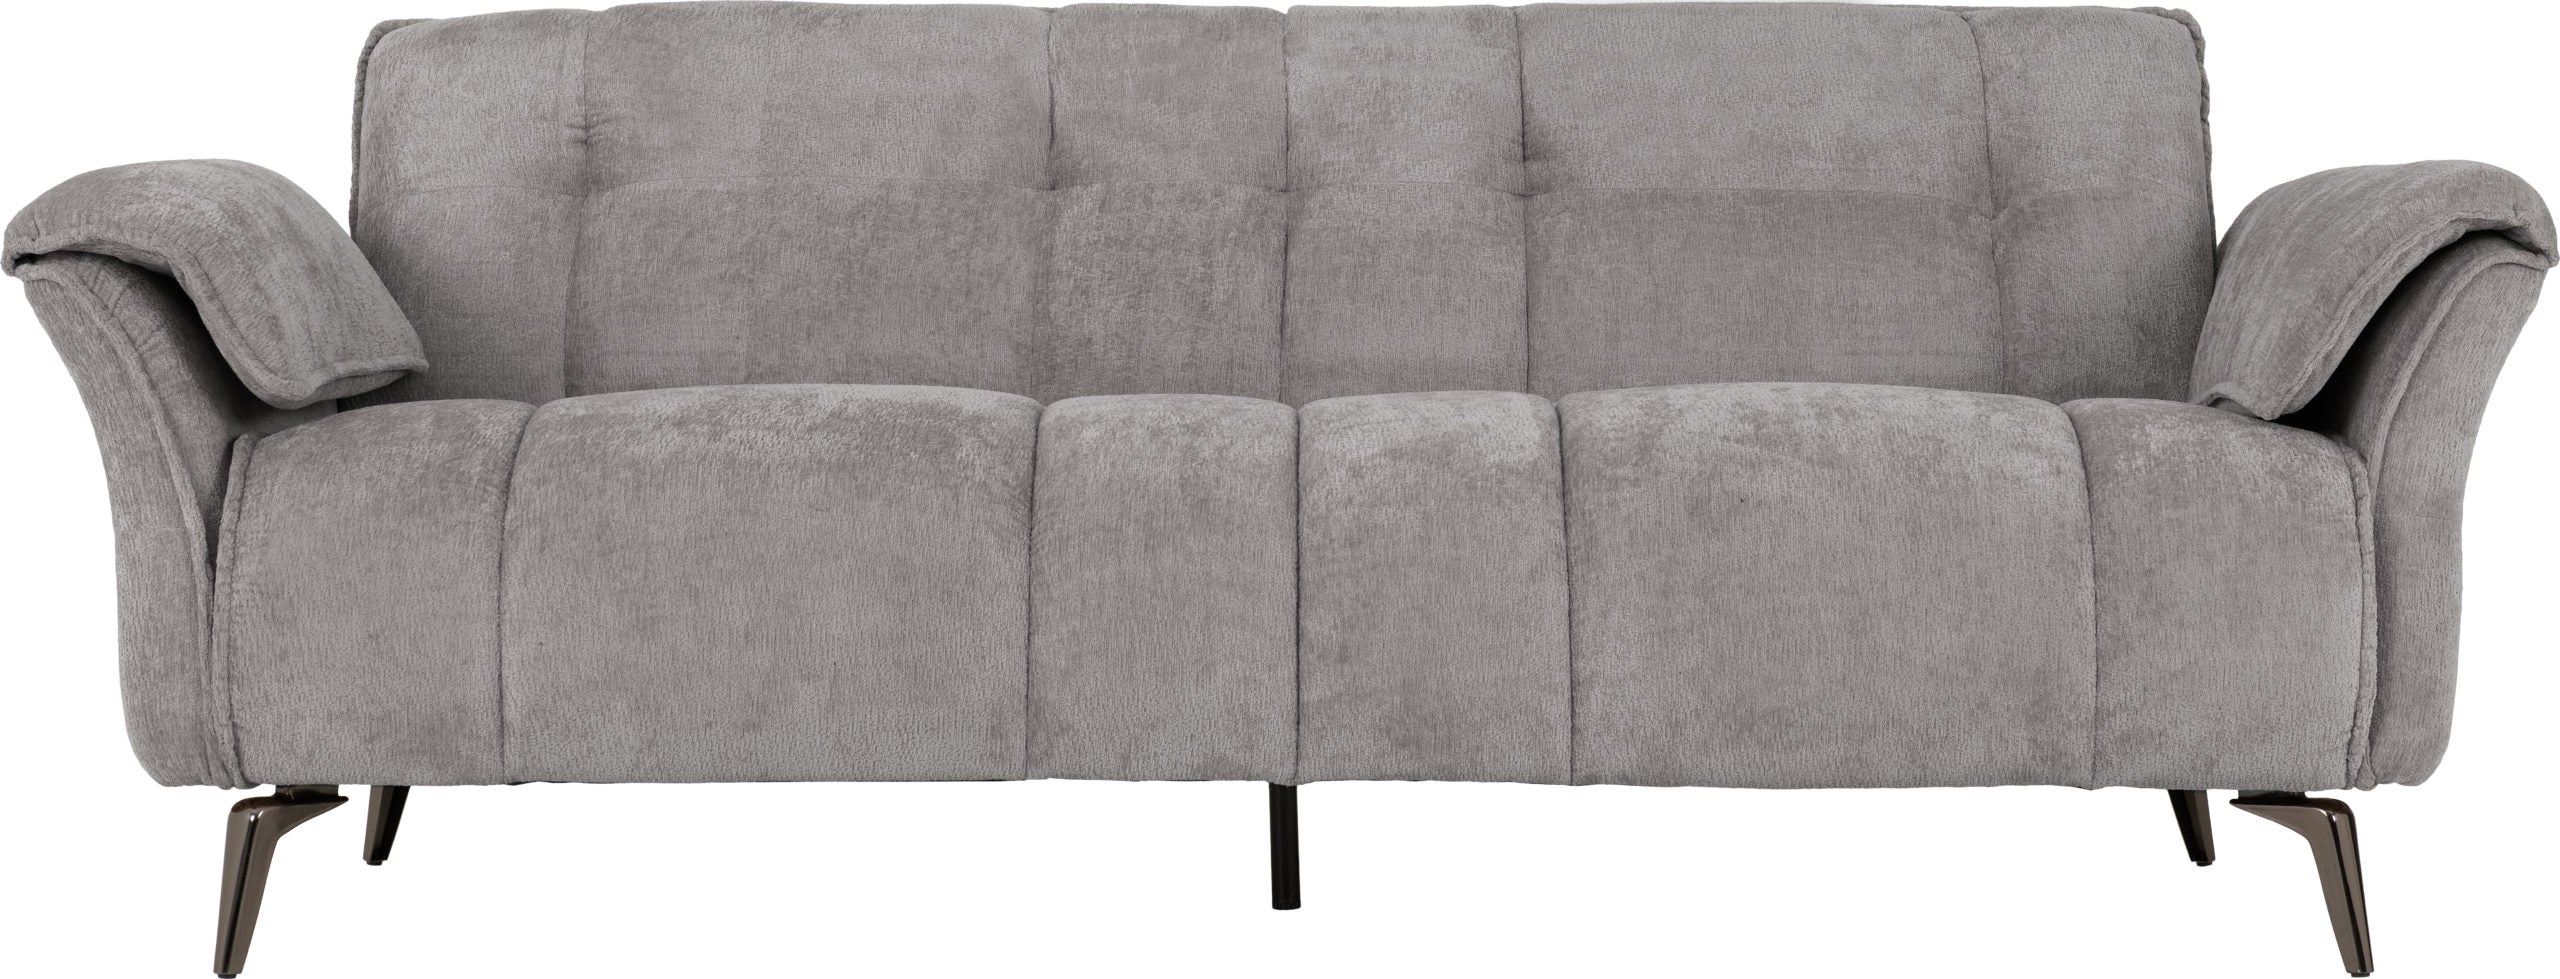 Amalfi 3 Seater Sofa in Grey Fabric with Metal Legs 2 Man Delivery